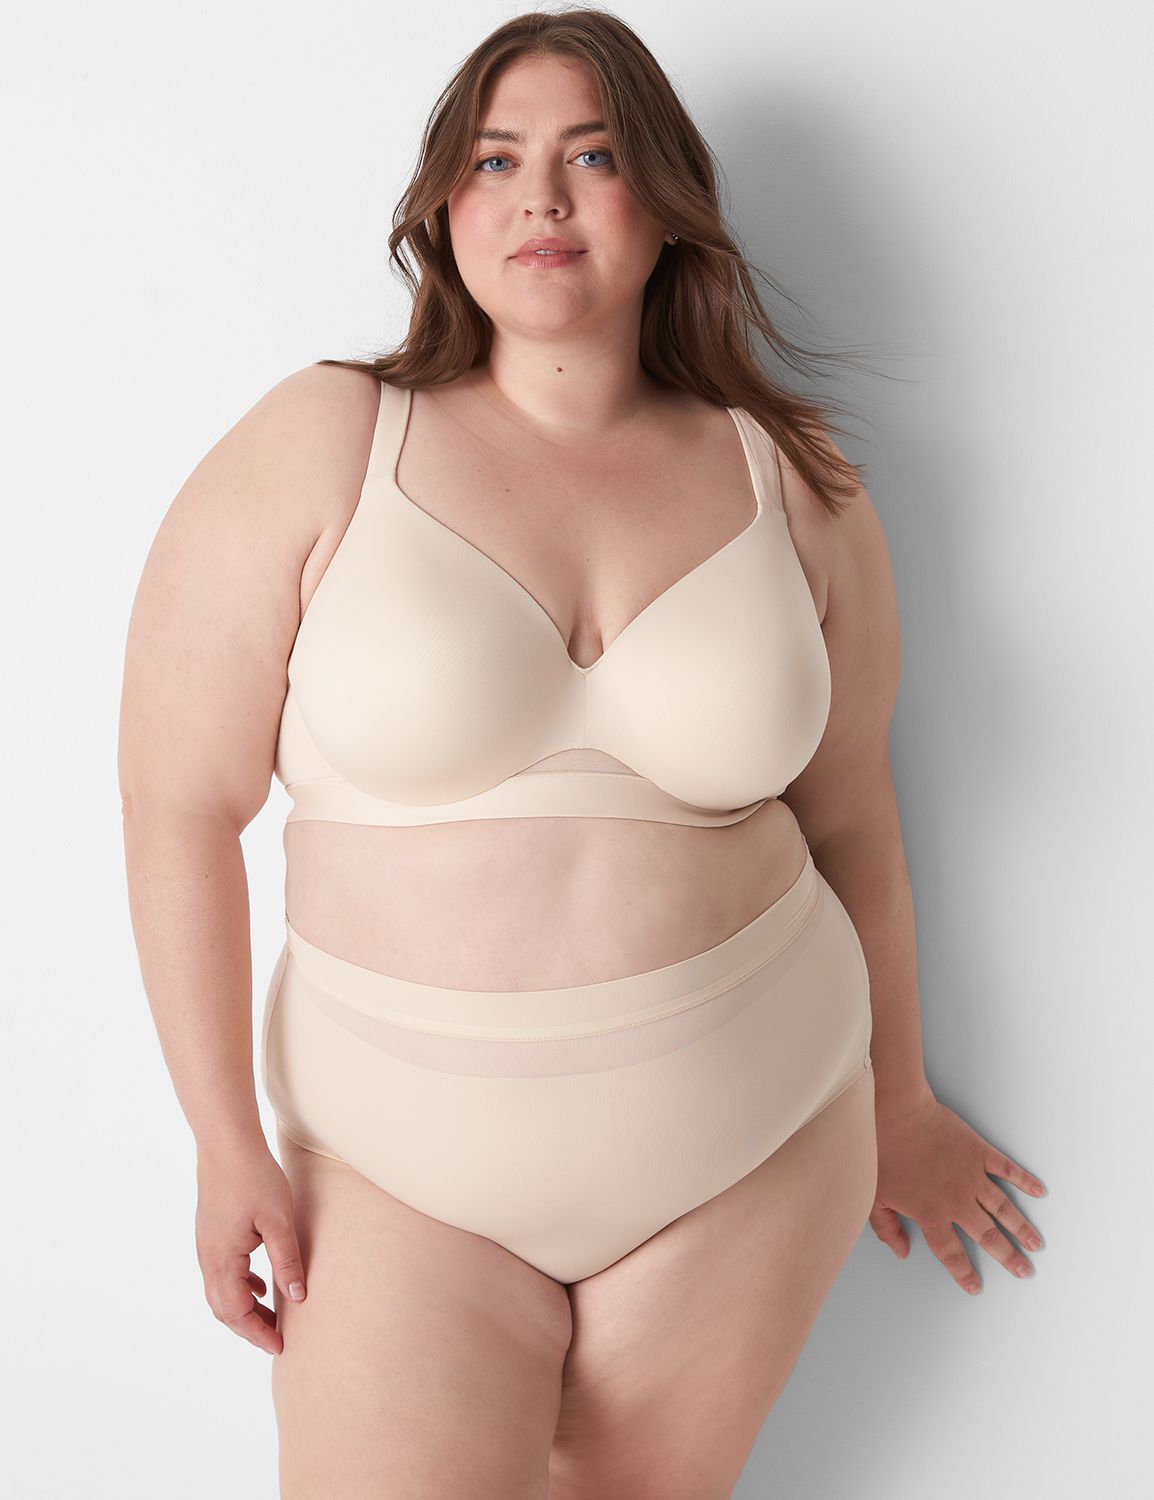 Penningtons - Fact: we make bras that are as comfy as they look